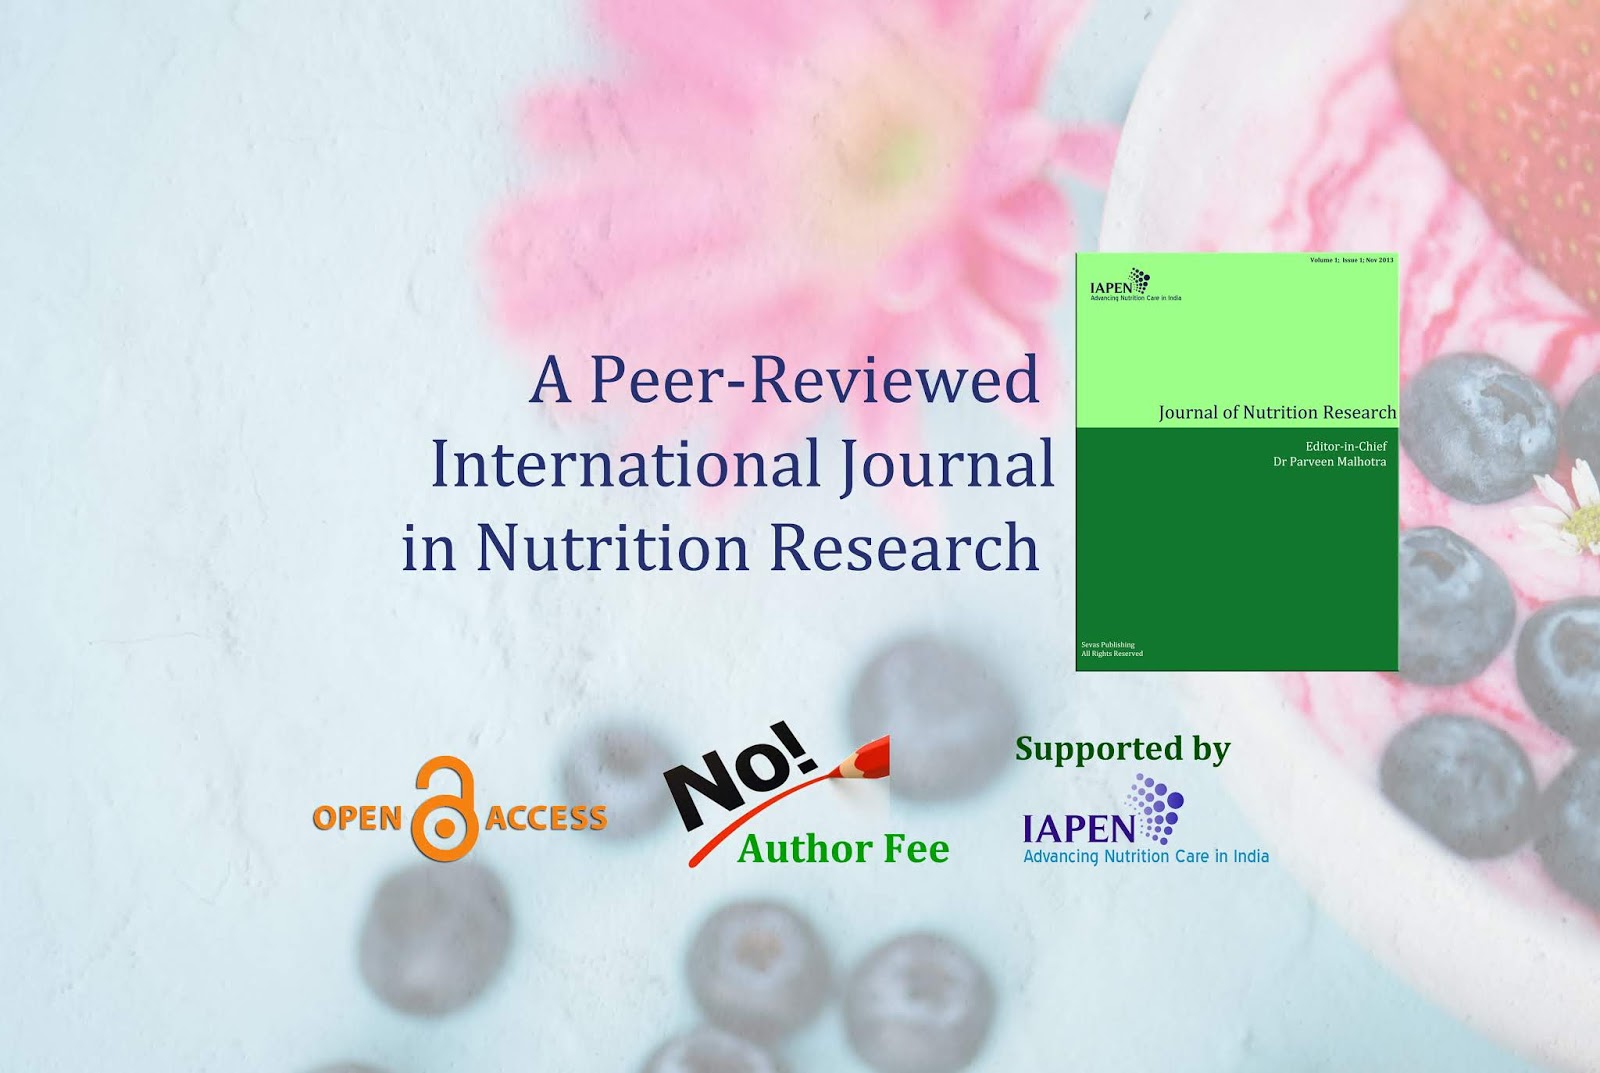 About Journal of Nutrition Research  Journal of Nutrition Research